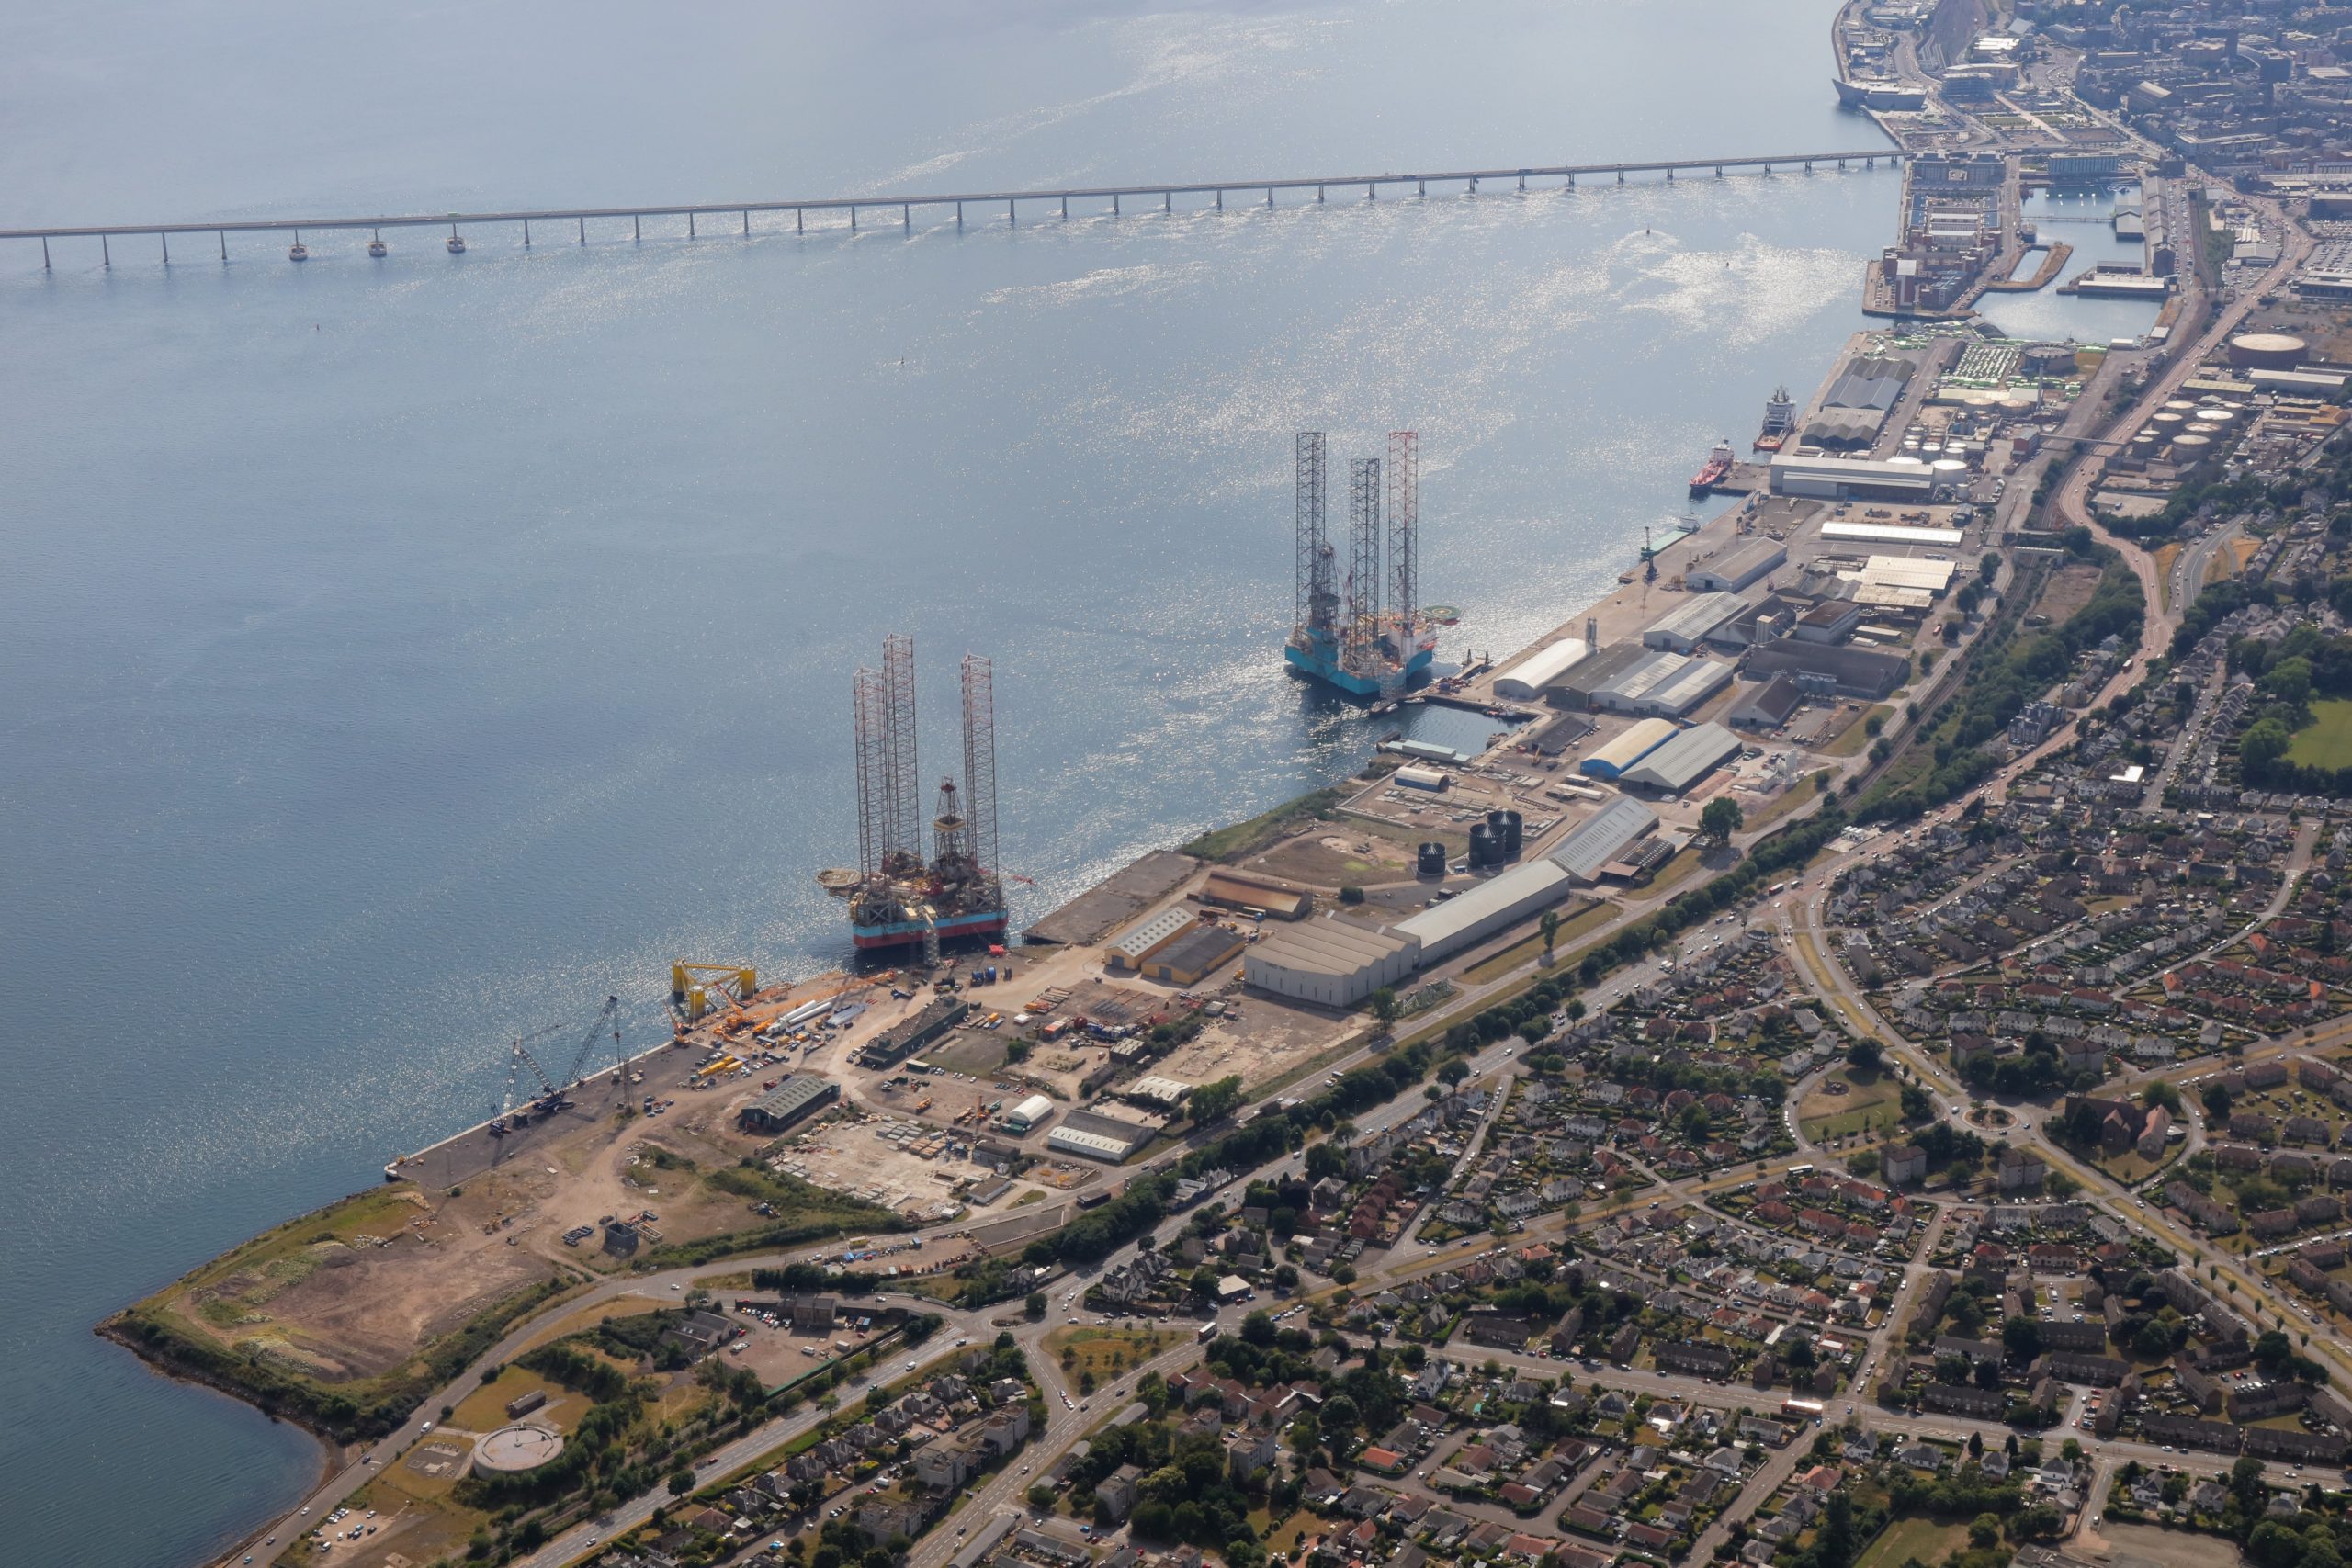 Forth Ports operates the Port of Dundee